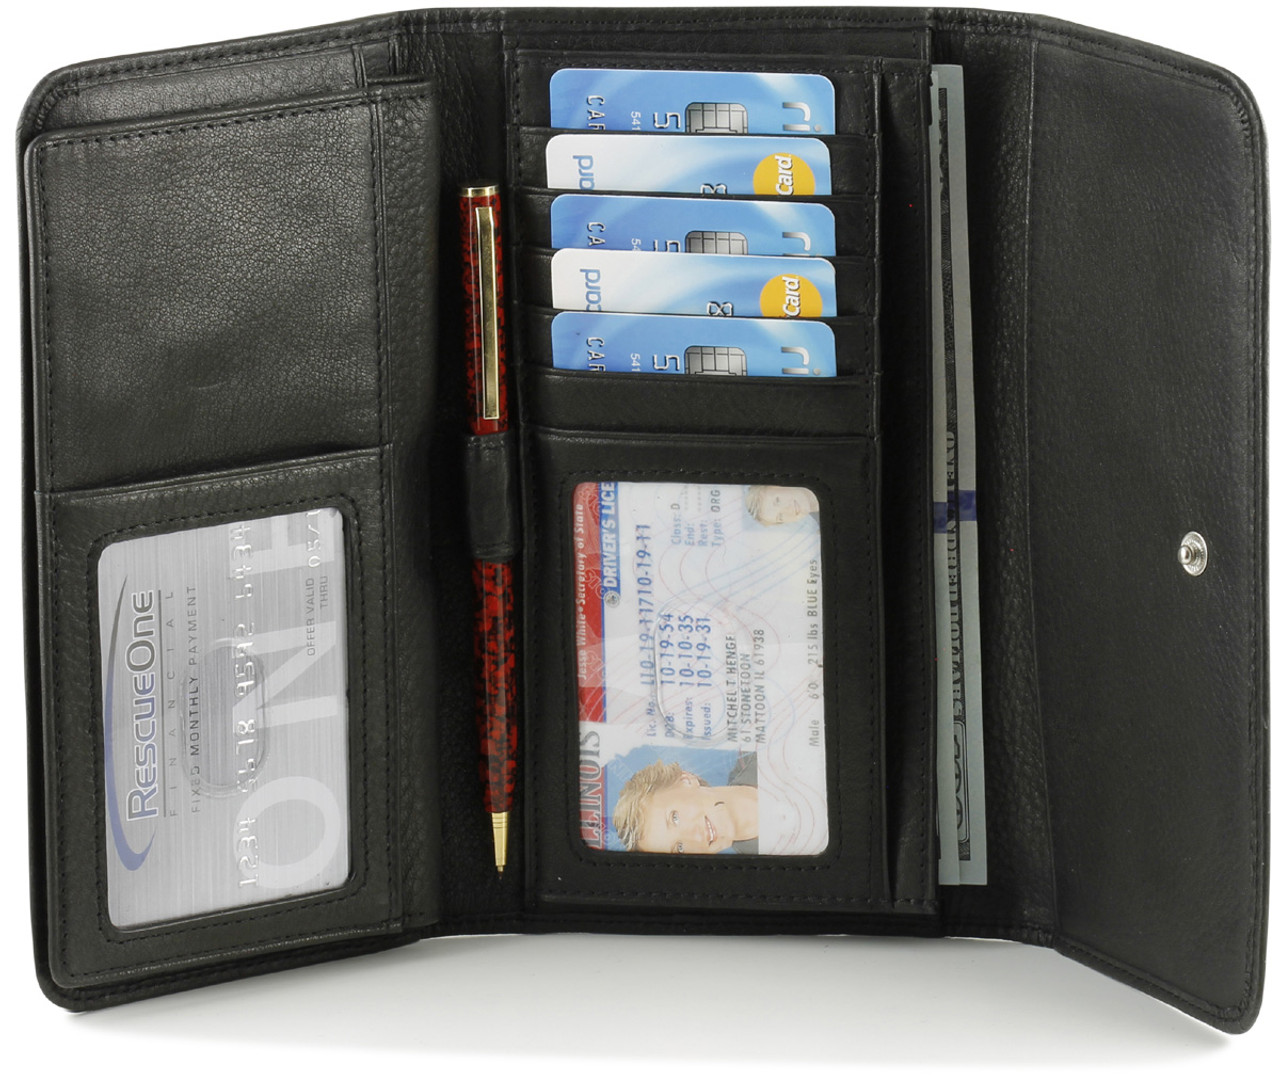 Genuine Leather Wallets For Women - Ladies Accordion Clutch Wallet With  Coin Purse Pocket And ID Window RFID Blocking 